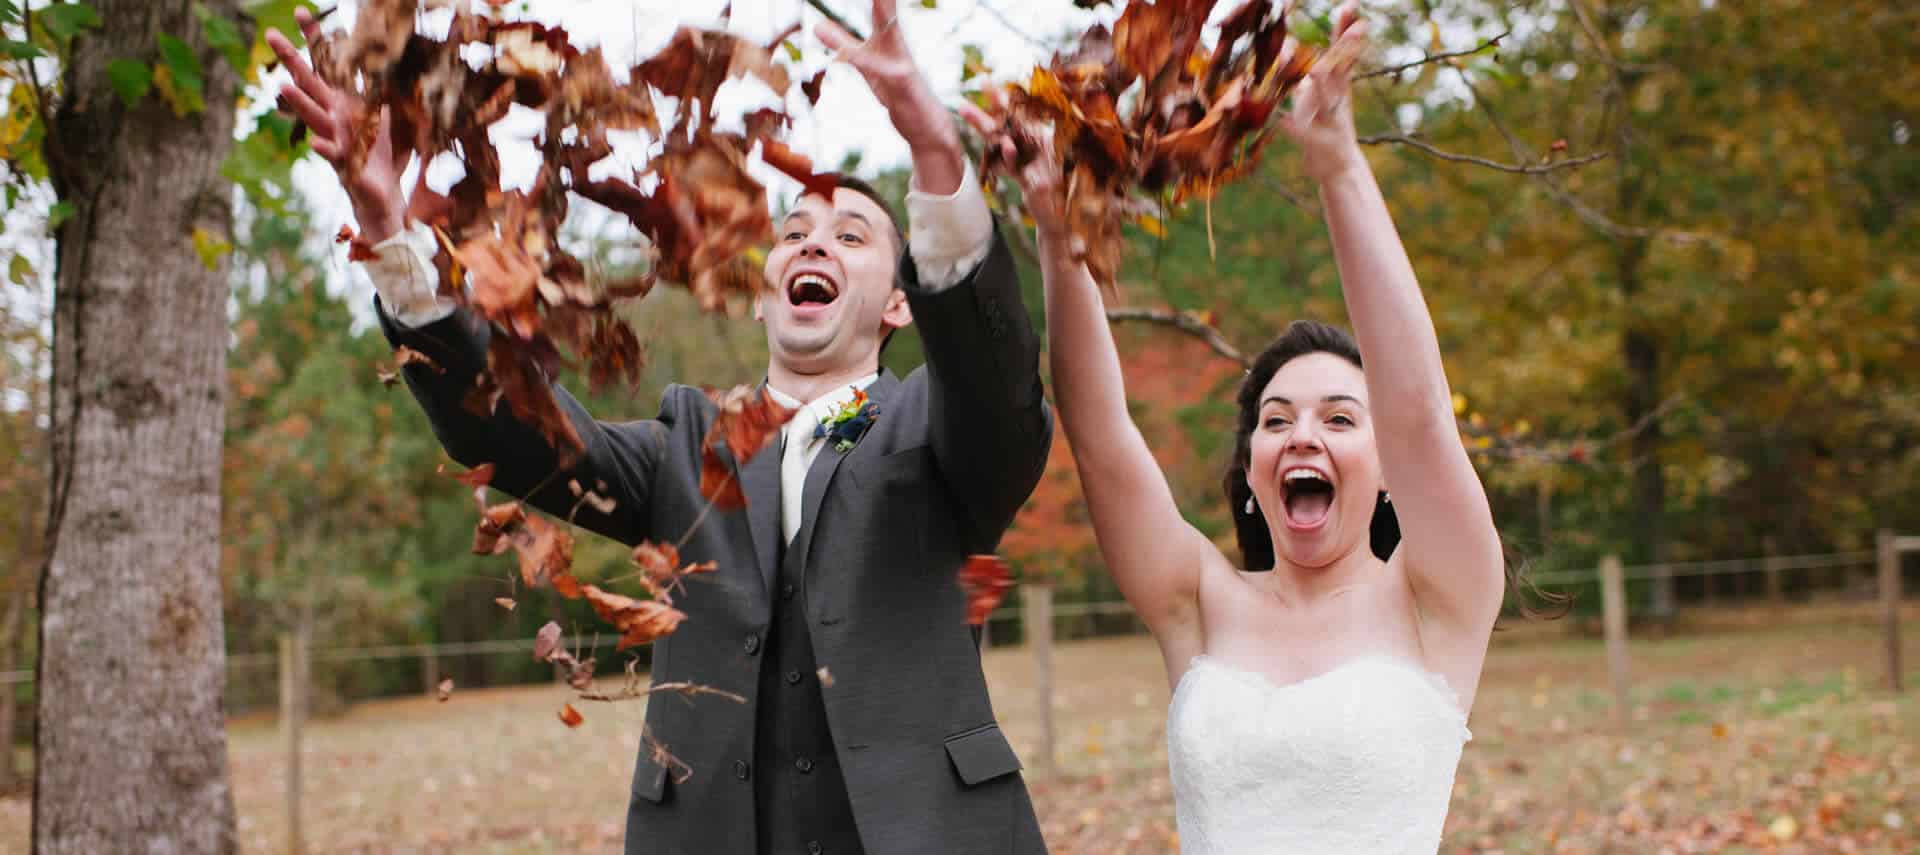 Young and happy bride and groom throw autumn leaves up into the air exuberantly.